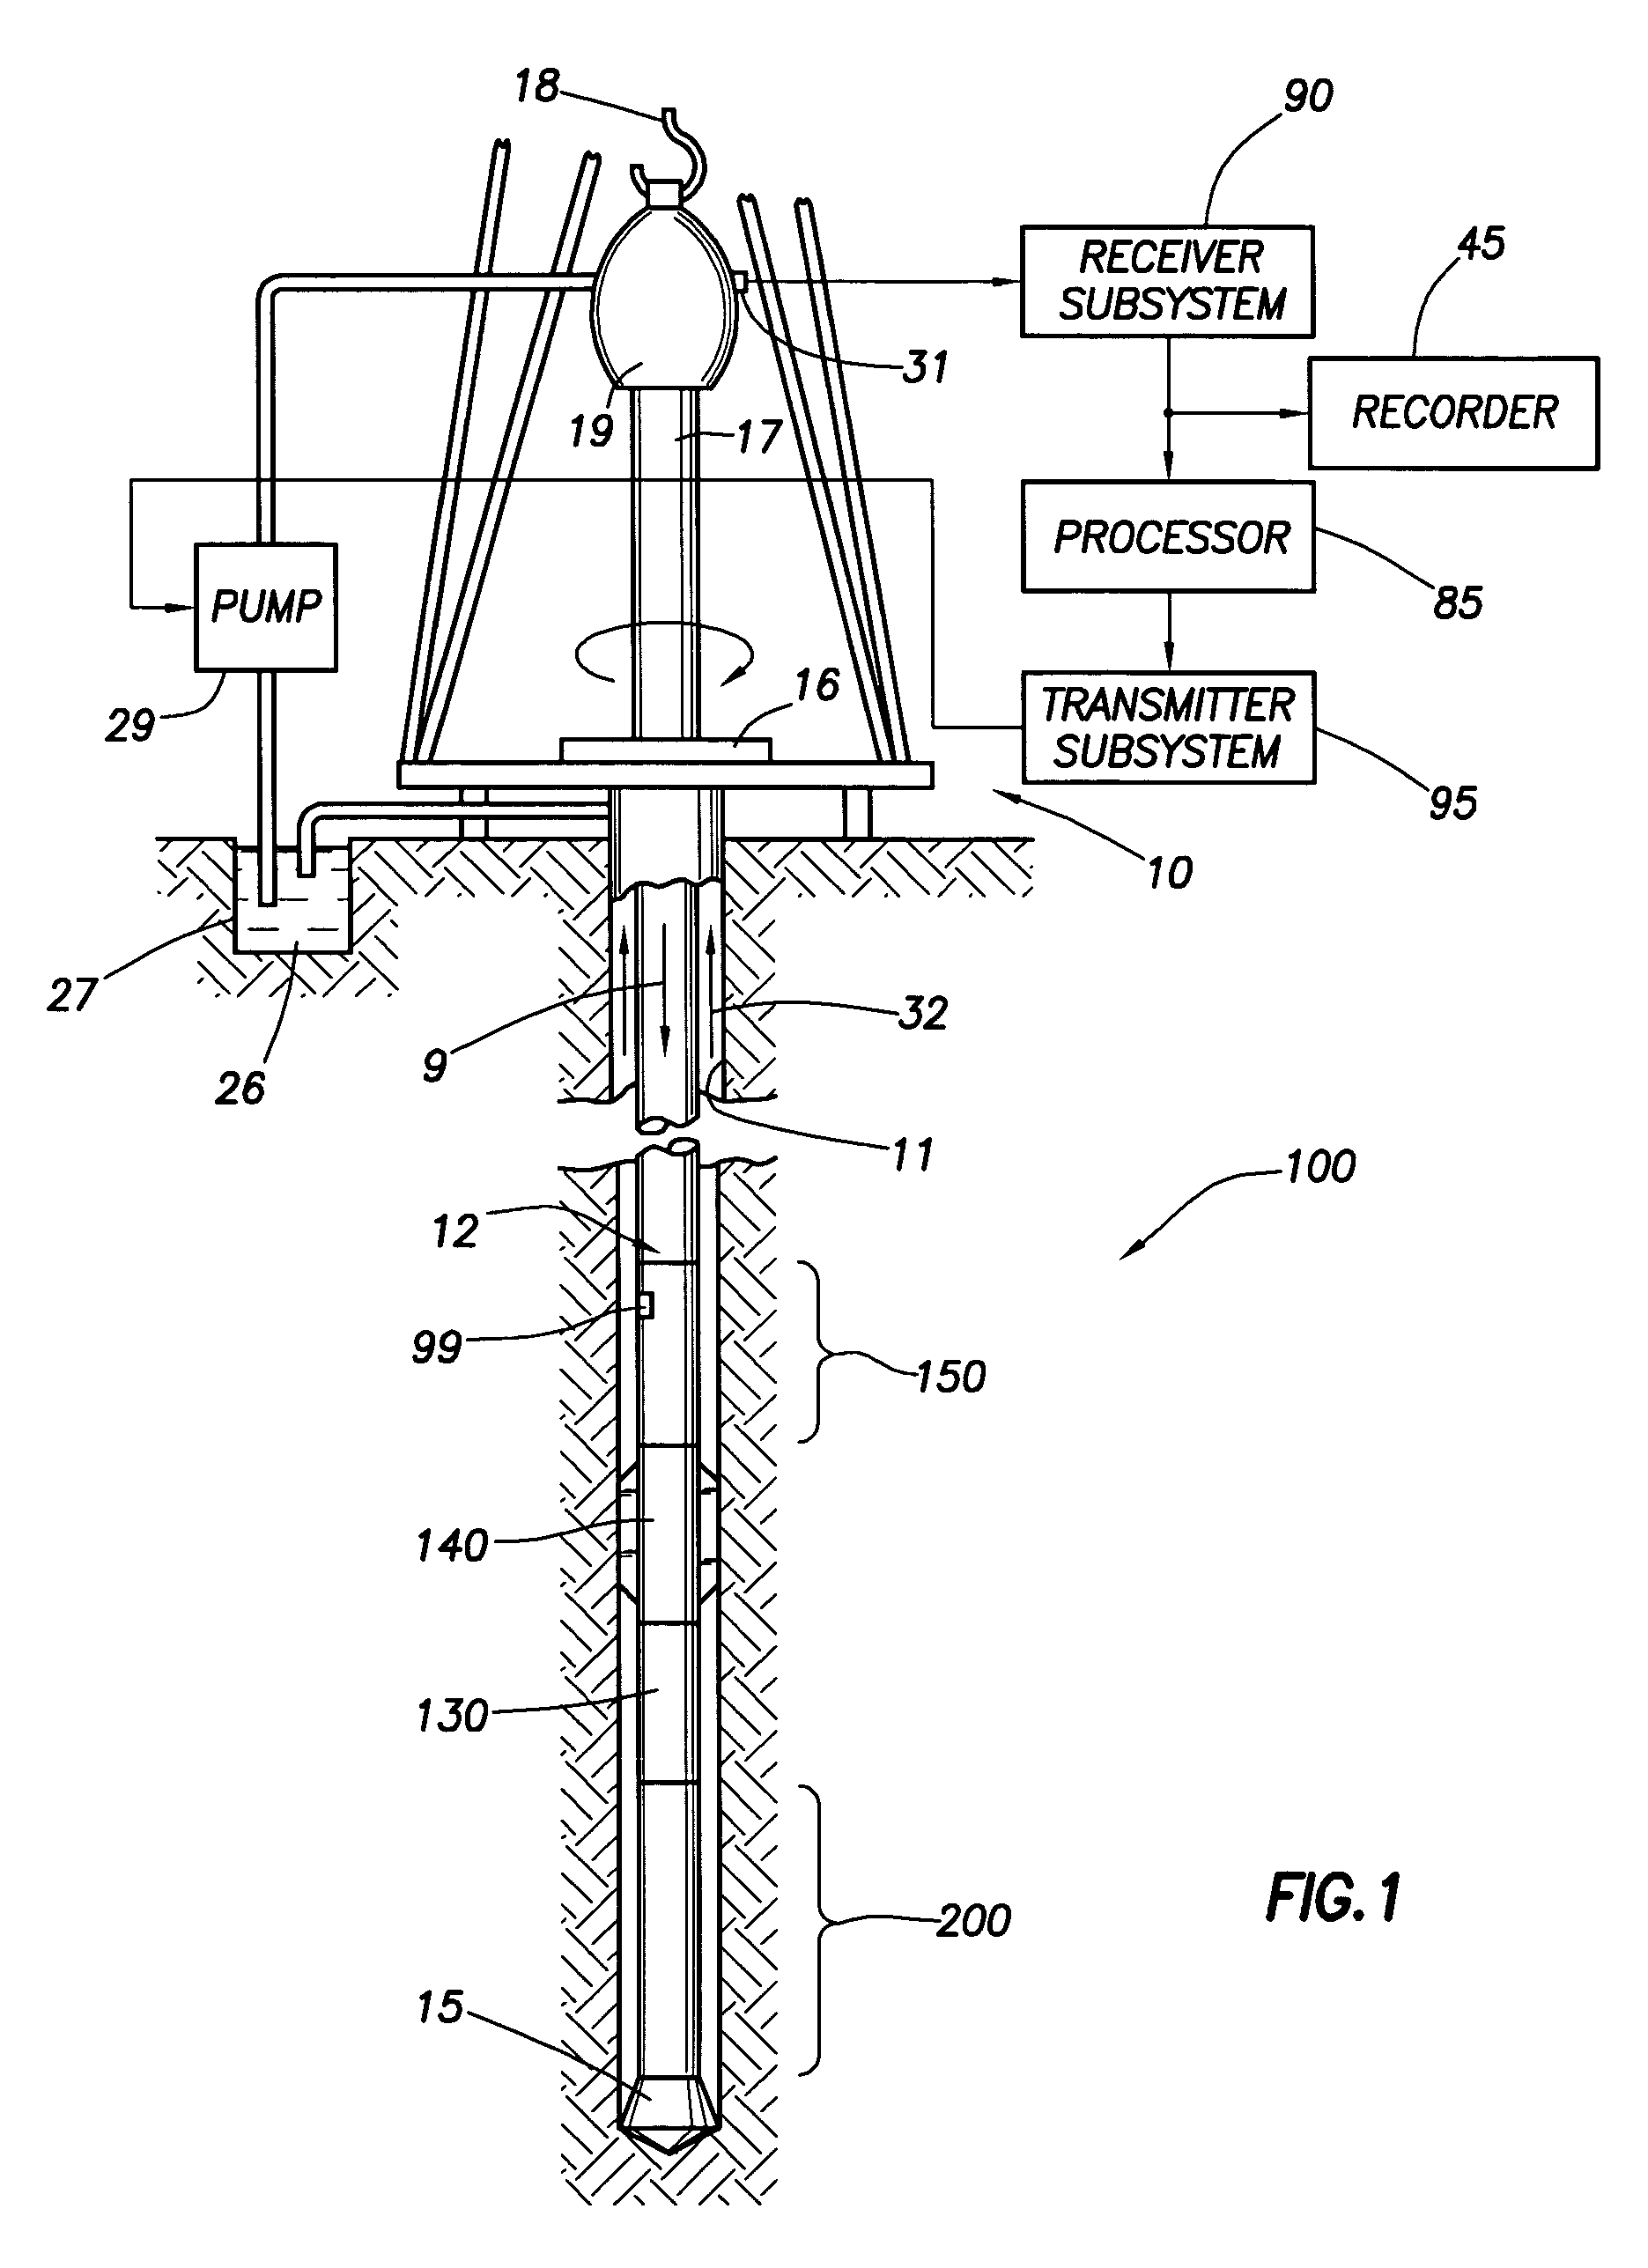 Downhole measurement of formation characteristics while drilling